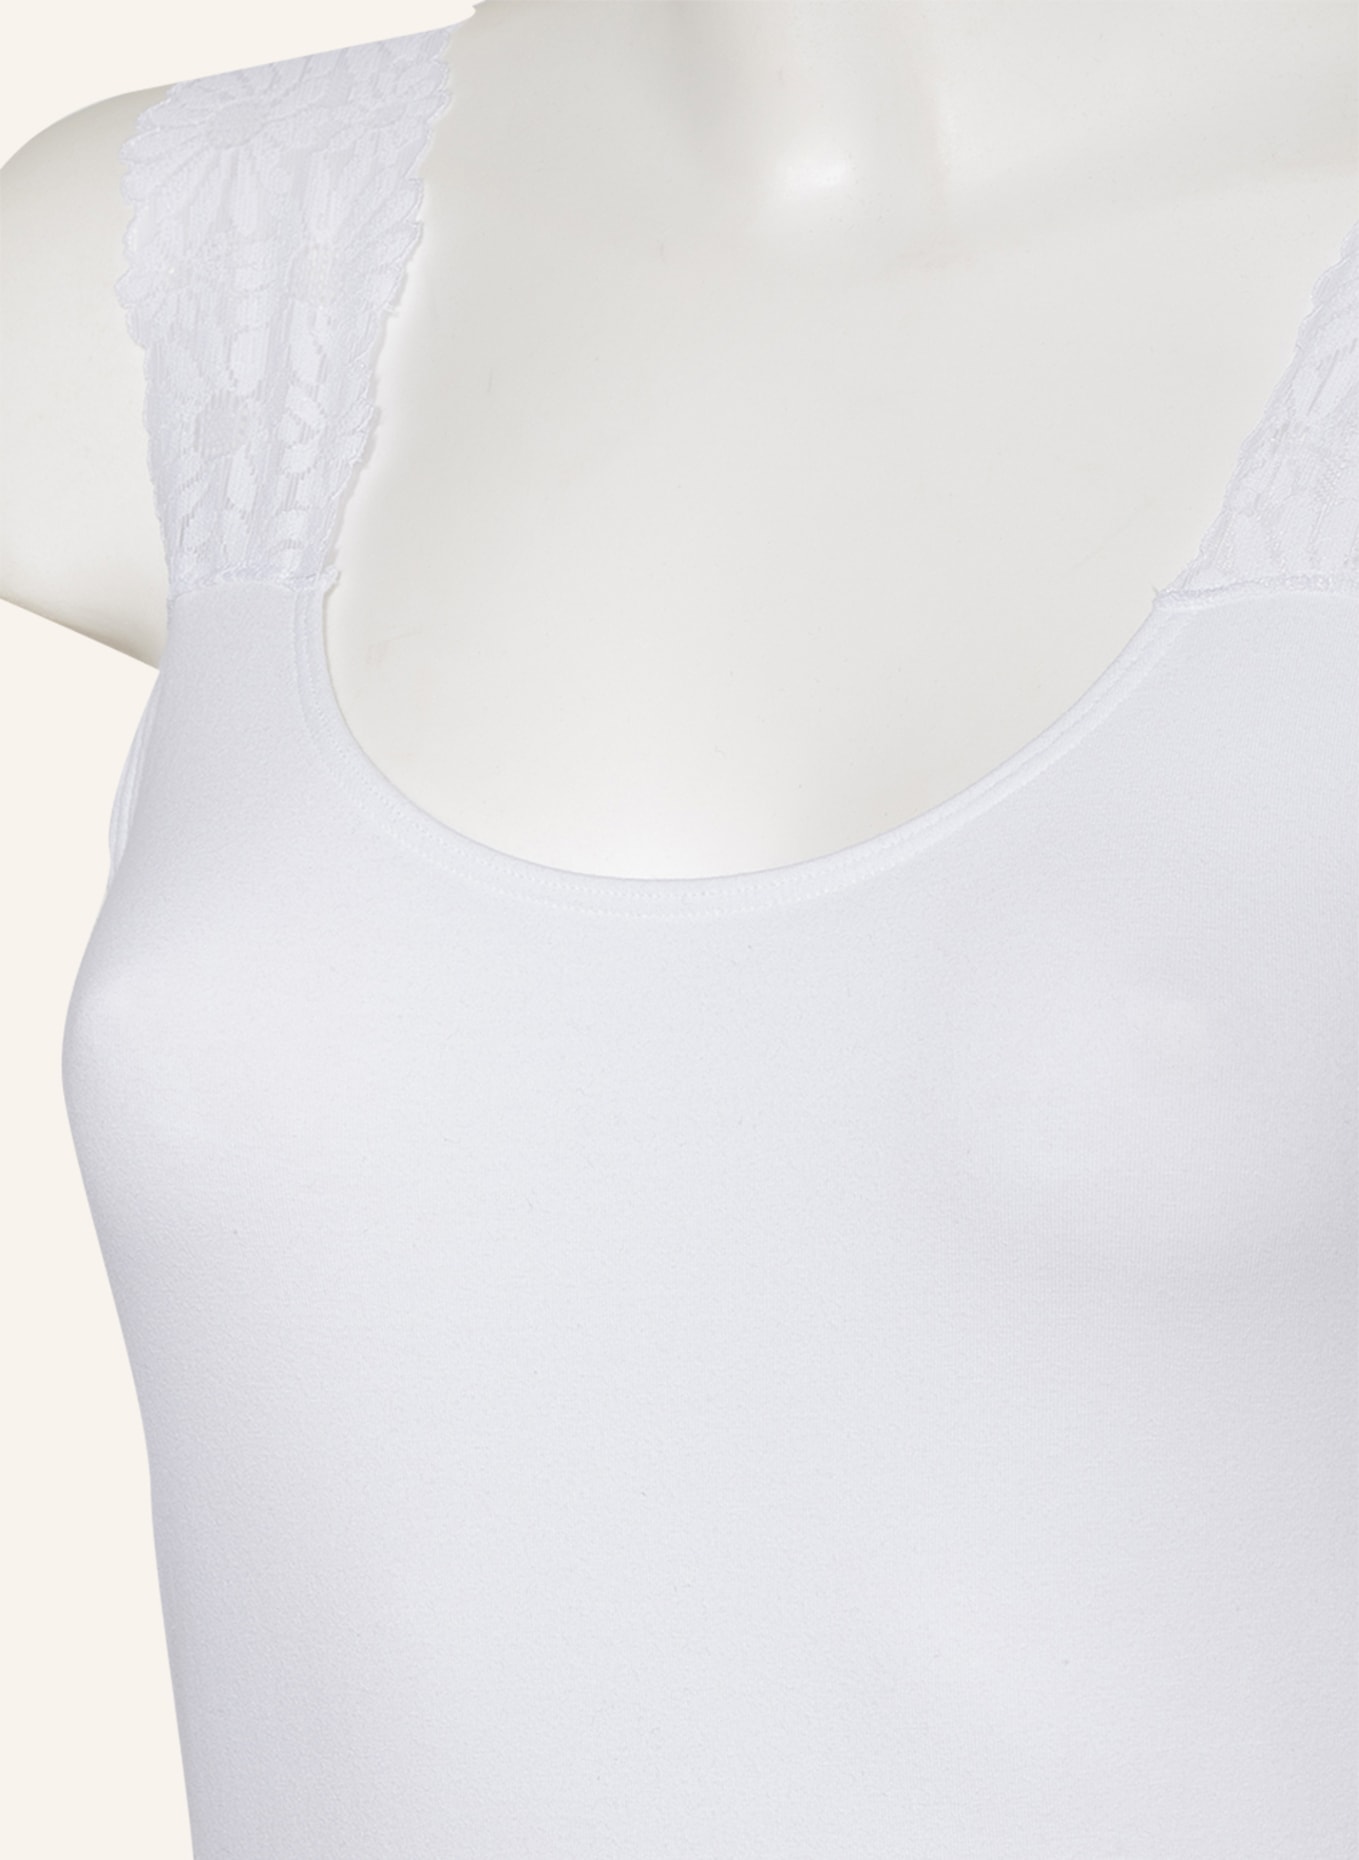 Skiny Top EVERY DAY IN COTTON, Farbe: WEISS (Bild 4)